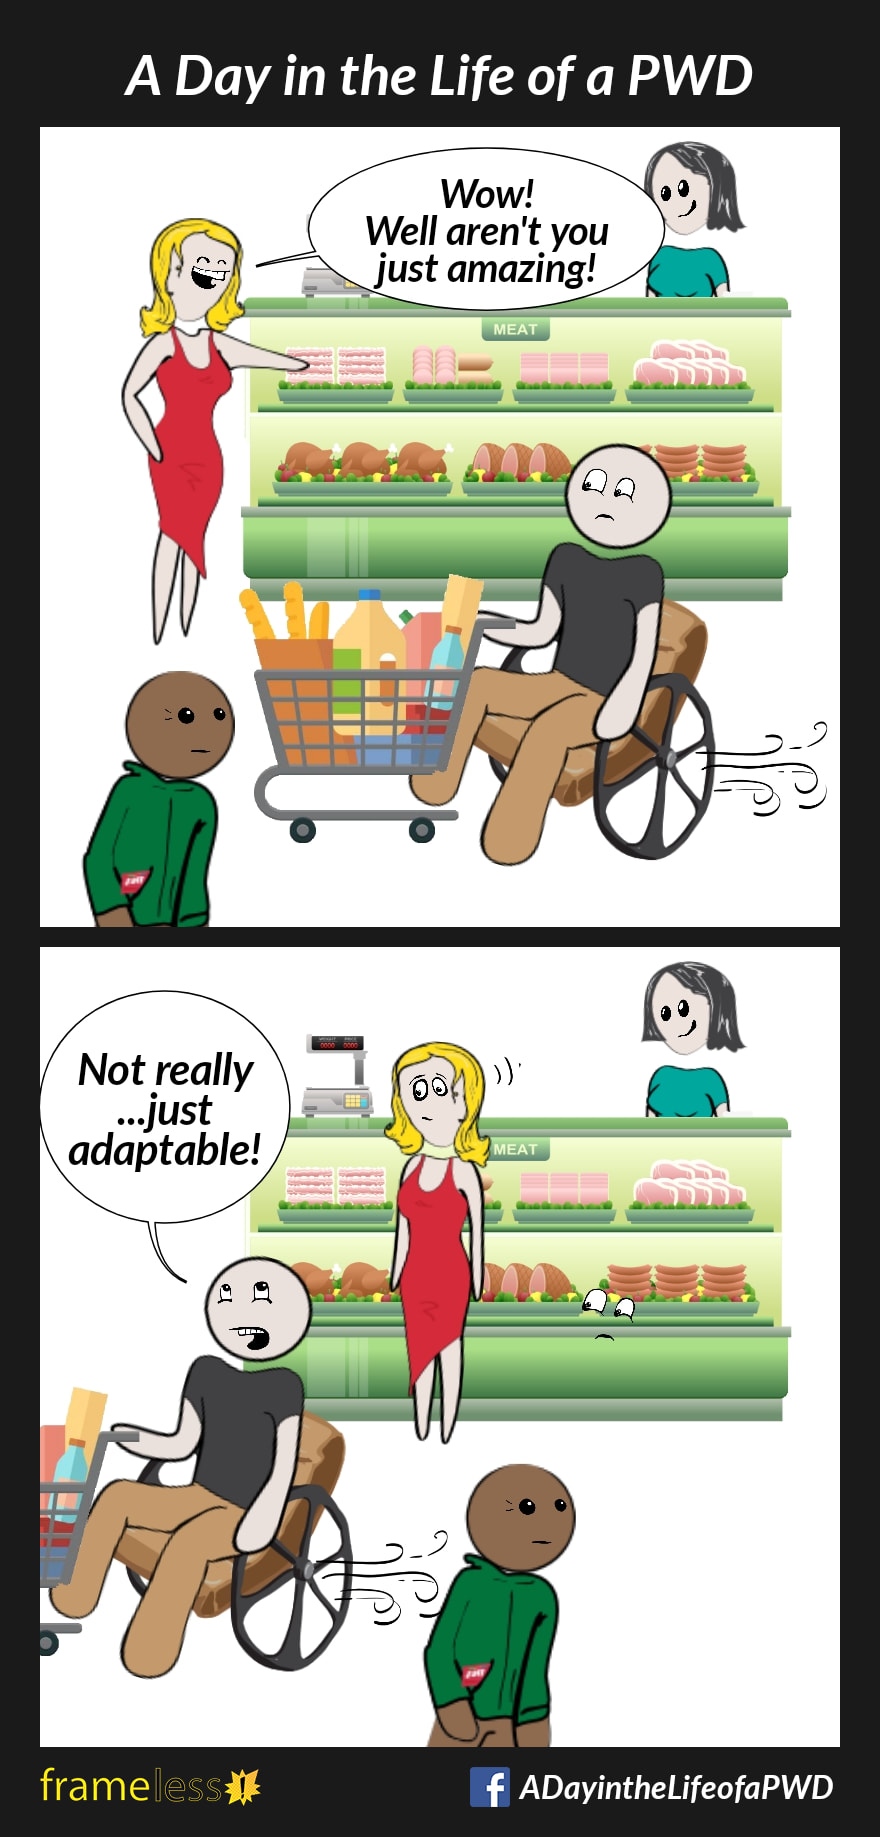 COMIC STRIP 
A Day in the Life of a PWD (Person With a Disability) 

Frame 1:
A nan in a manual wheelchair is traveling through a grocery store, pushing a grocery cart.
A woman at the deli counter notices him.
WOMAN: Wow! Well aren't you just amazing!

Frame 2:
MAN: Not really...just adaptable!